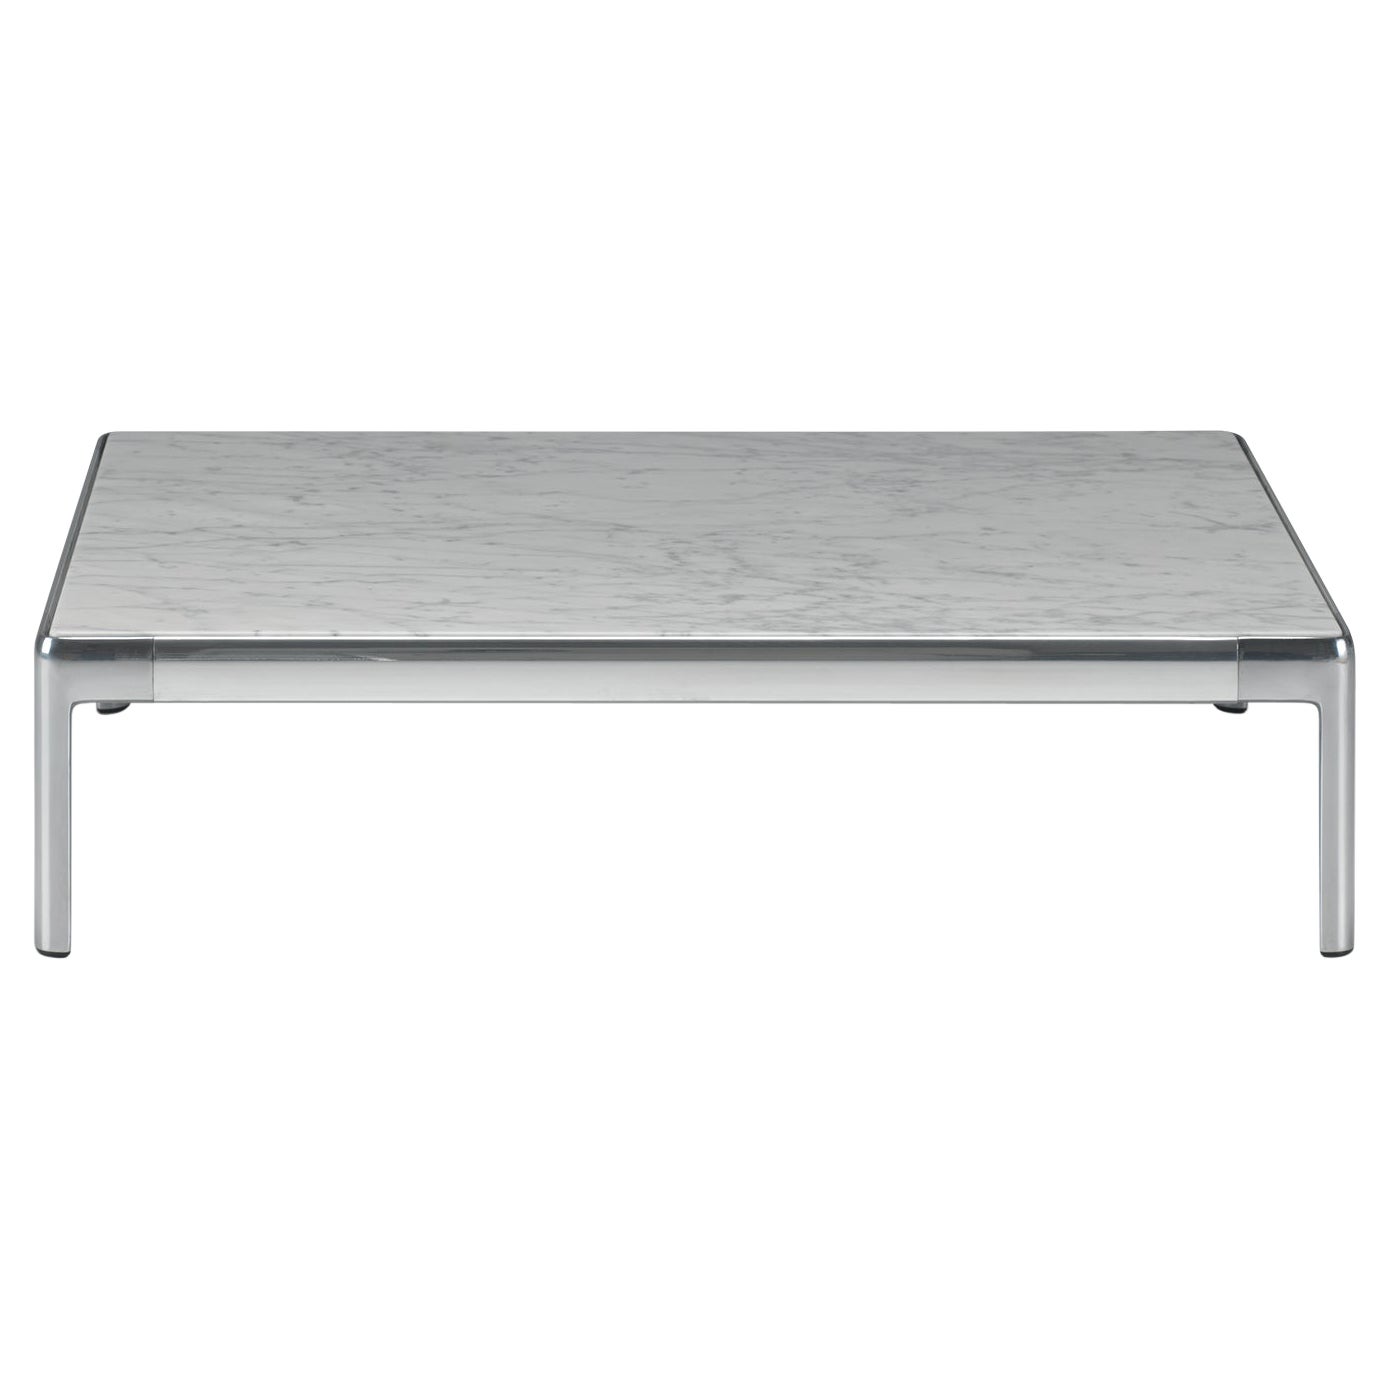 Alias P17 AluZen Low Table 80X95 with Marble Top and Polished Aluminum Frame For Sale